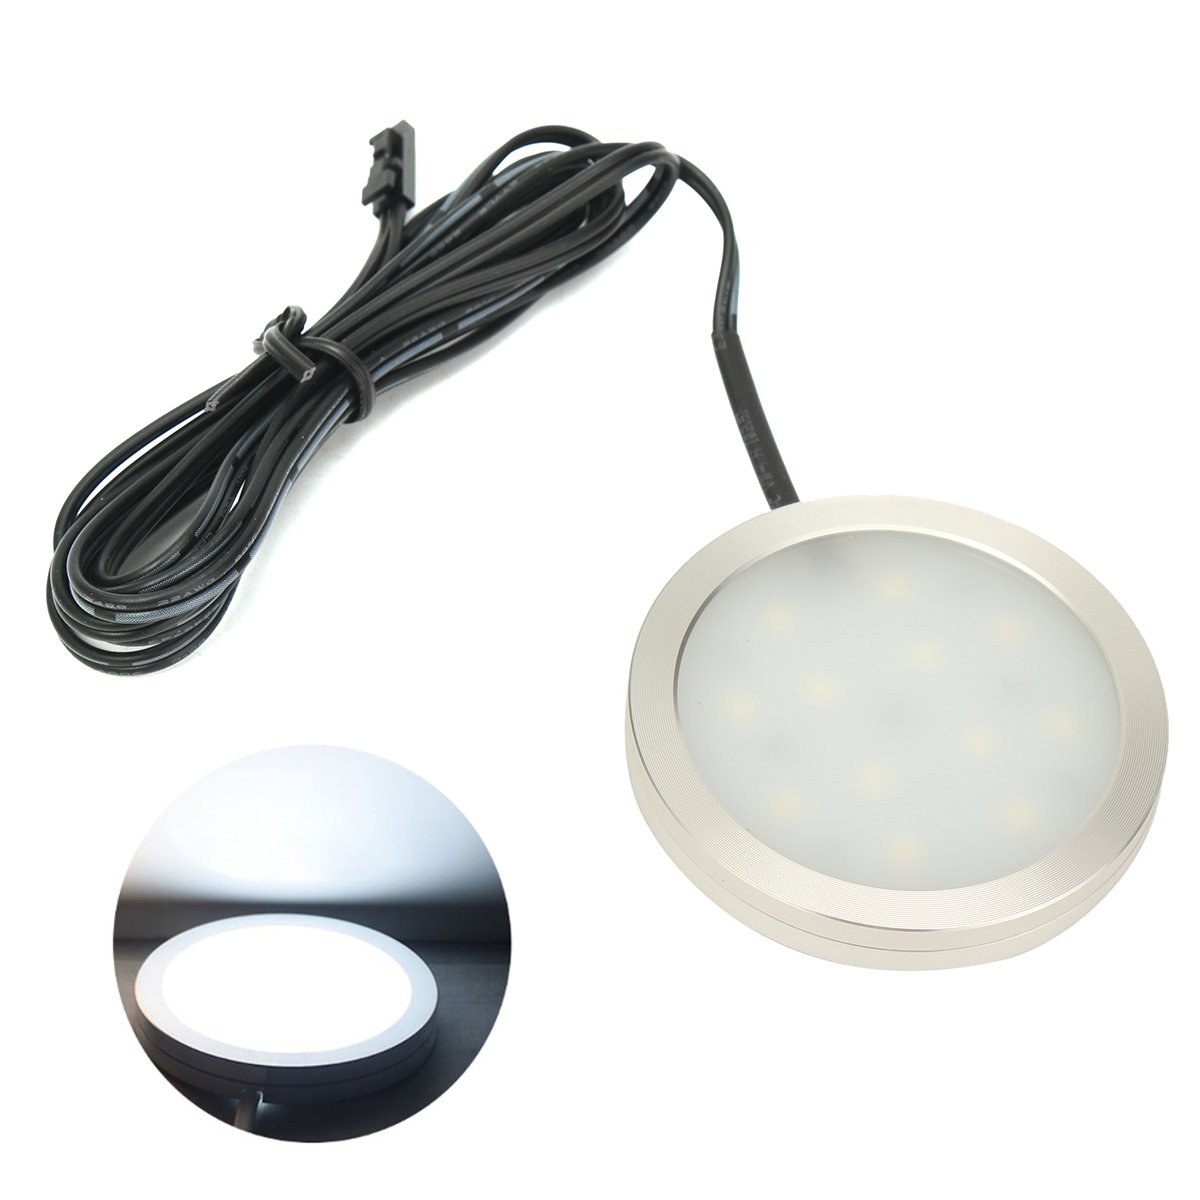 8PCS-LED-Cabinet-Light-White-Dimmable-Kitchen-Counter-Under-Puck-RF-Wireless-Remote-Control--Power-S-1682682-4